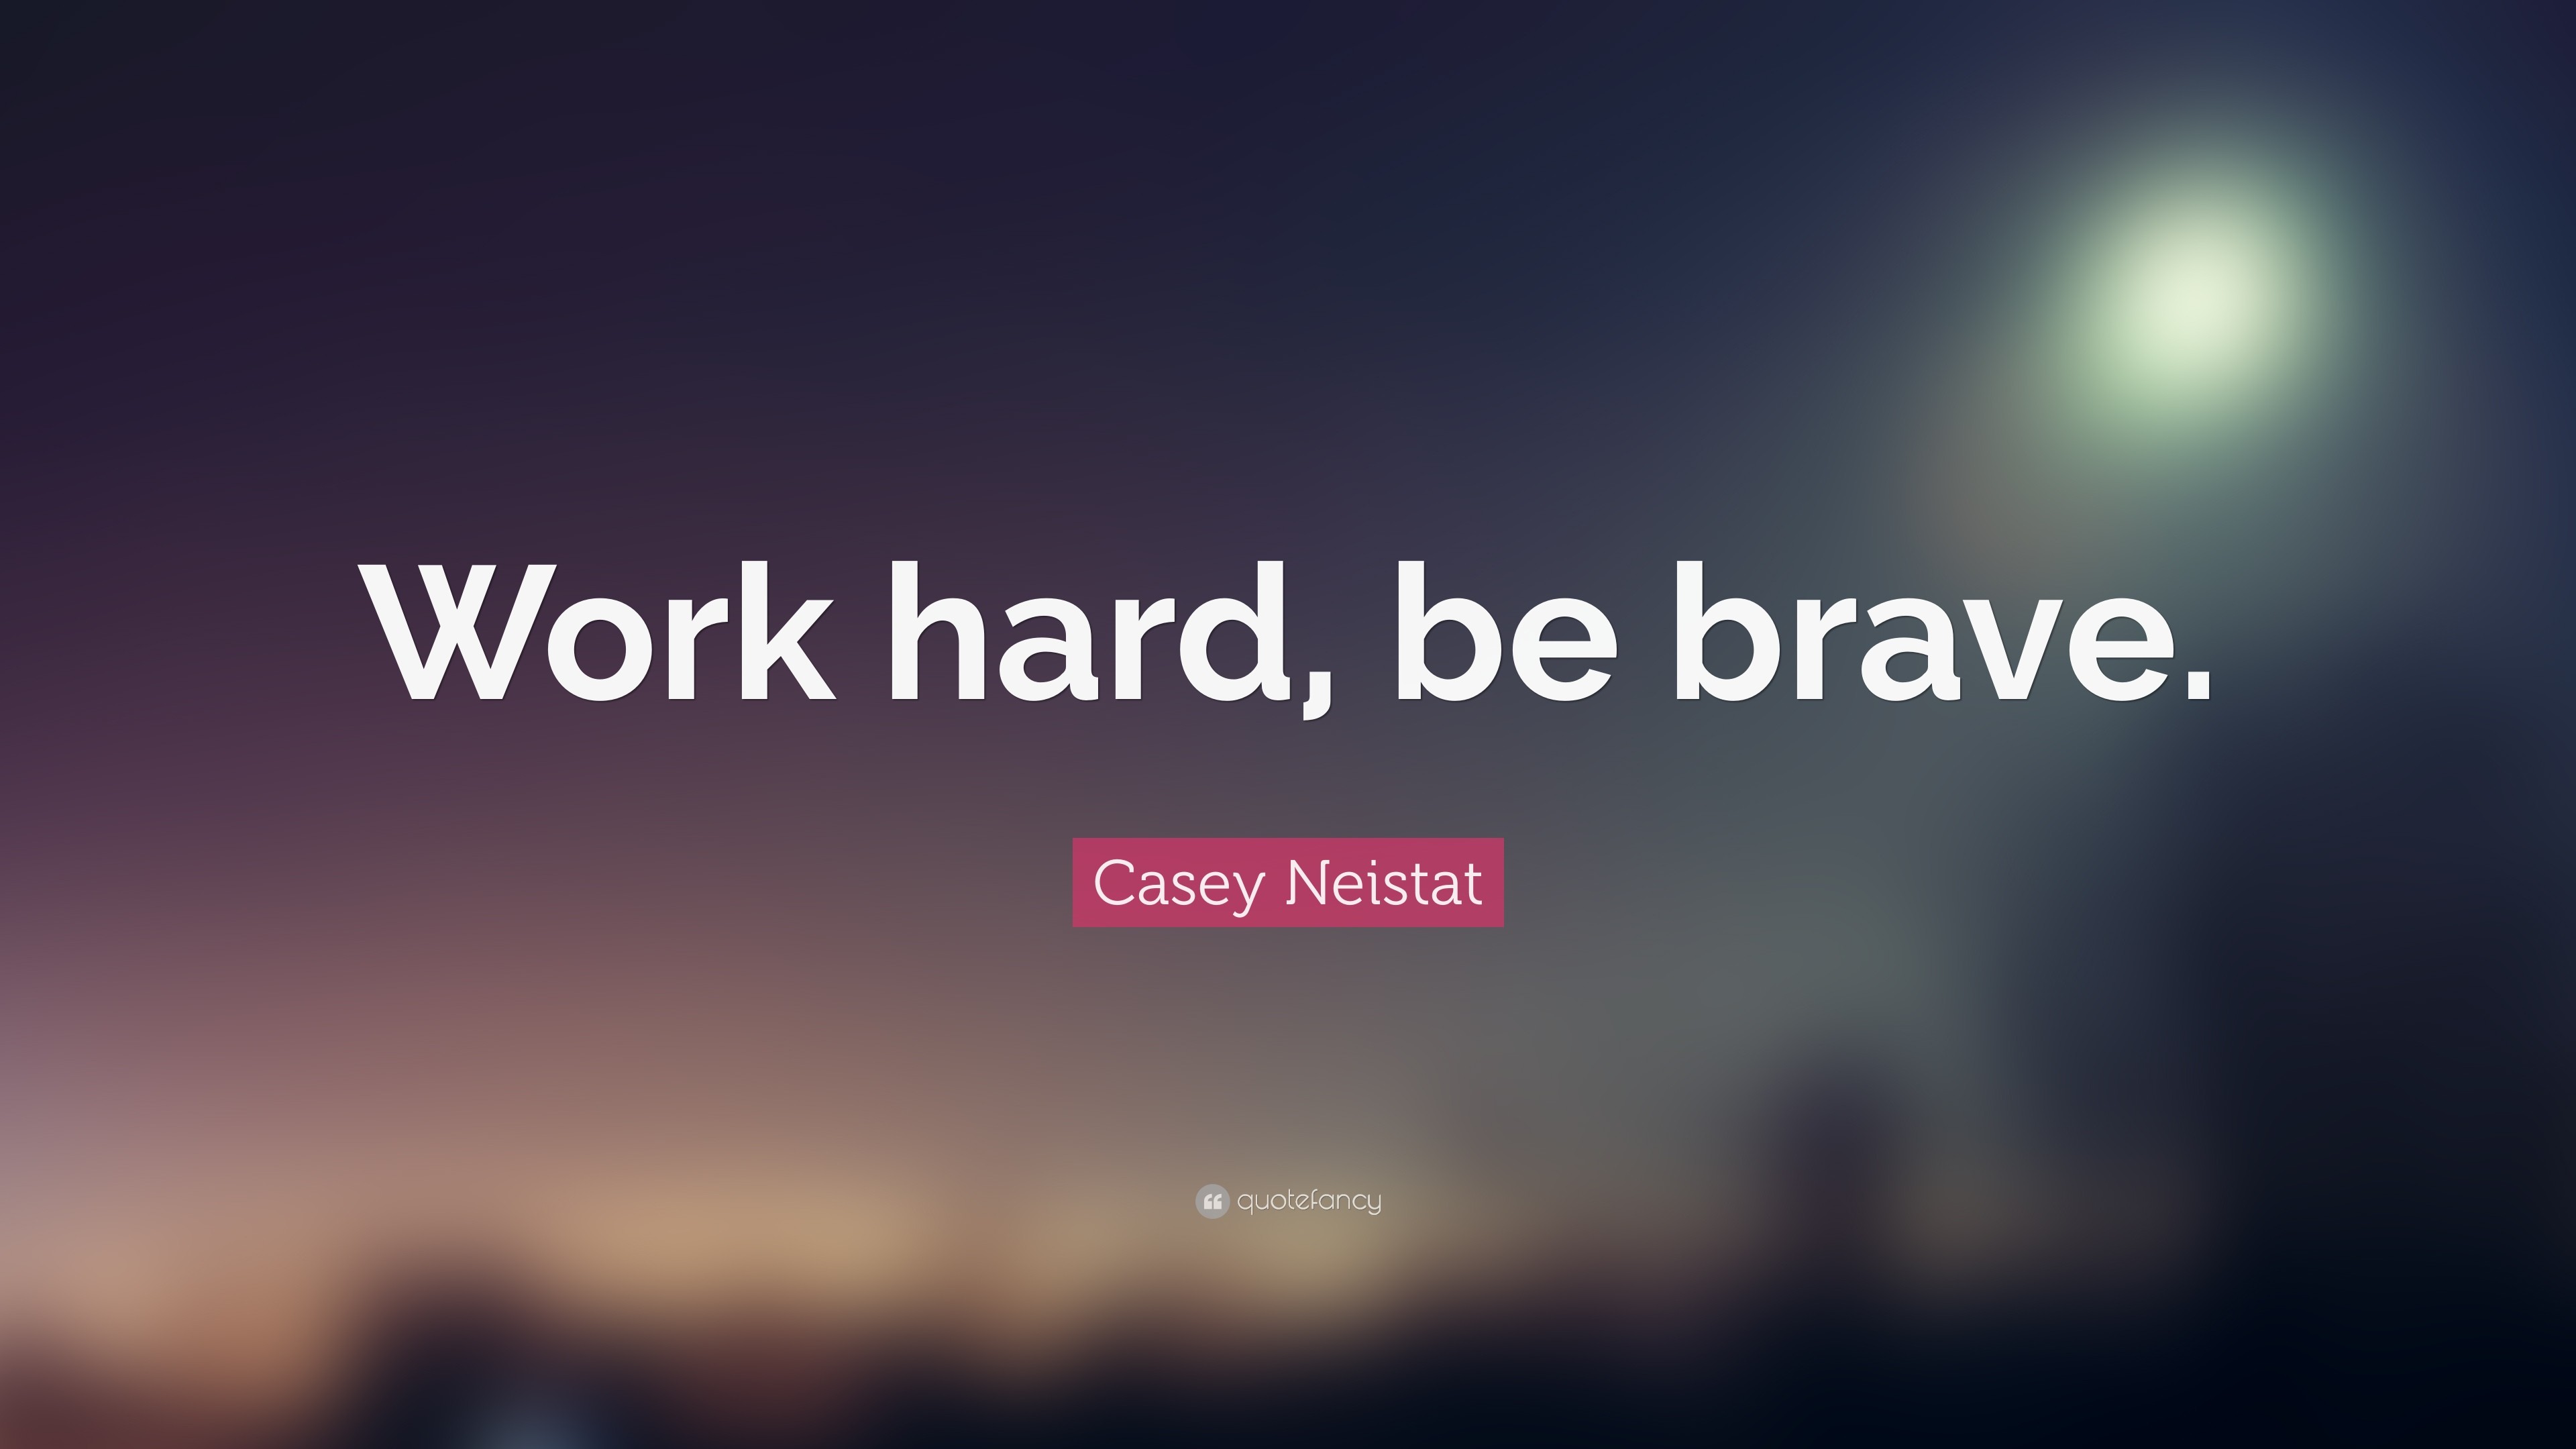 3840x2160 Casey Neistat Quote: “Work hard, be brave.”